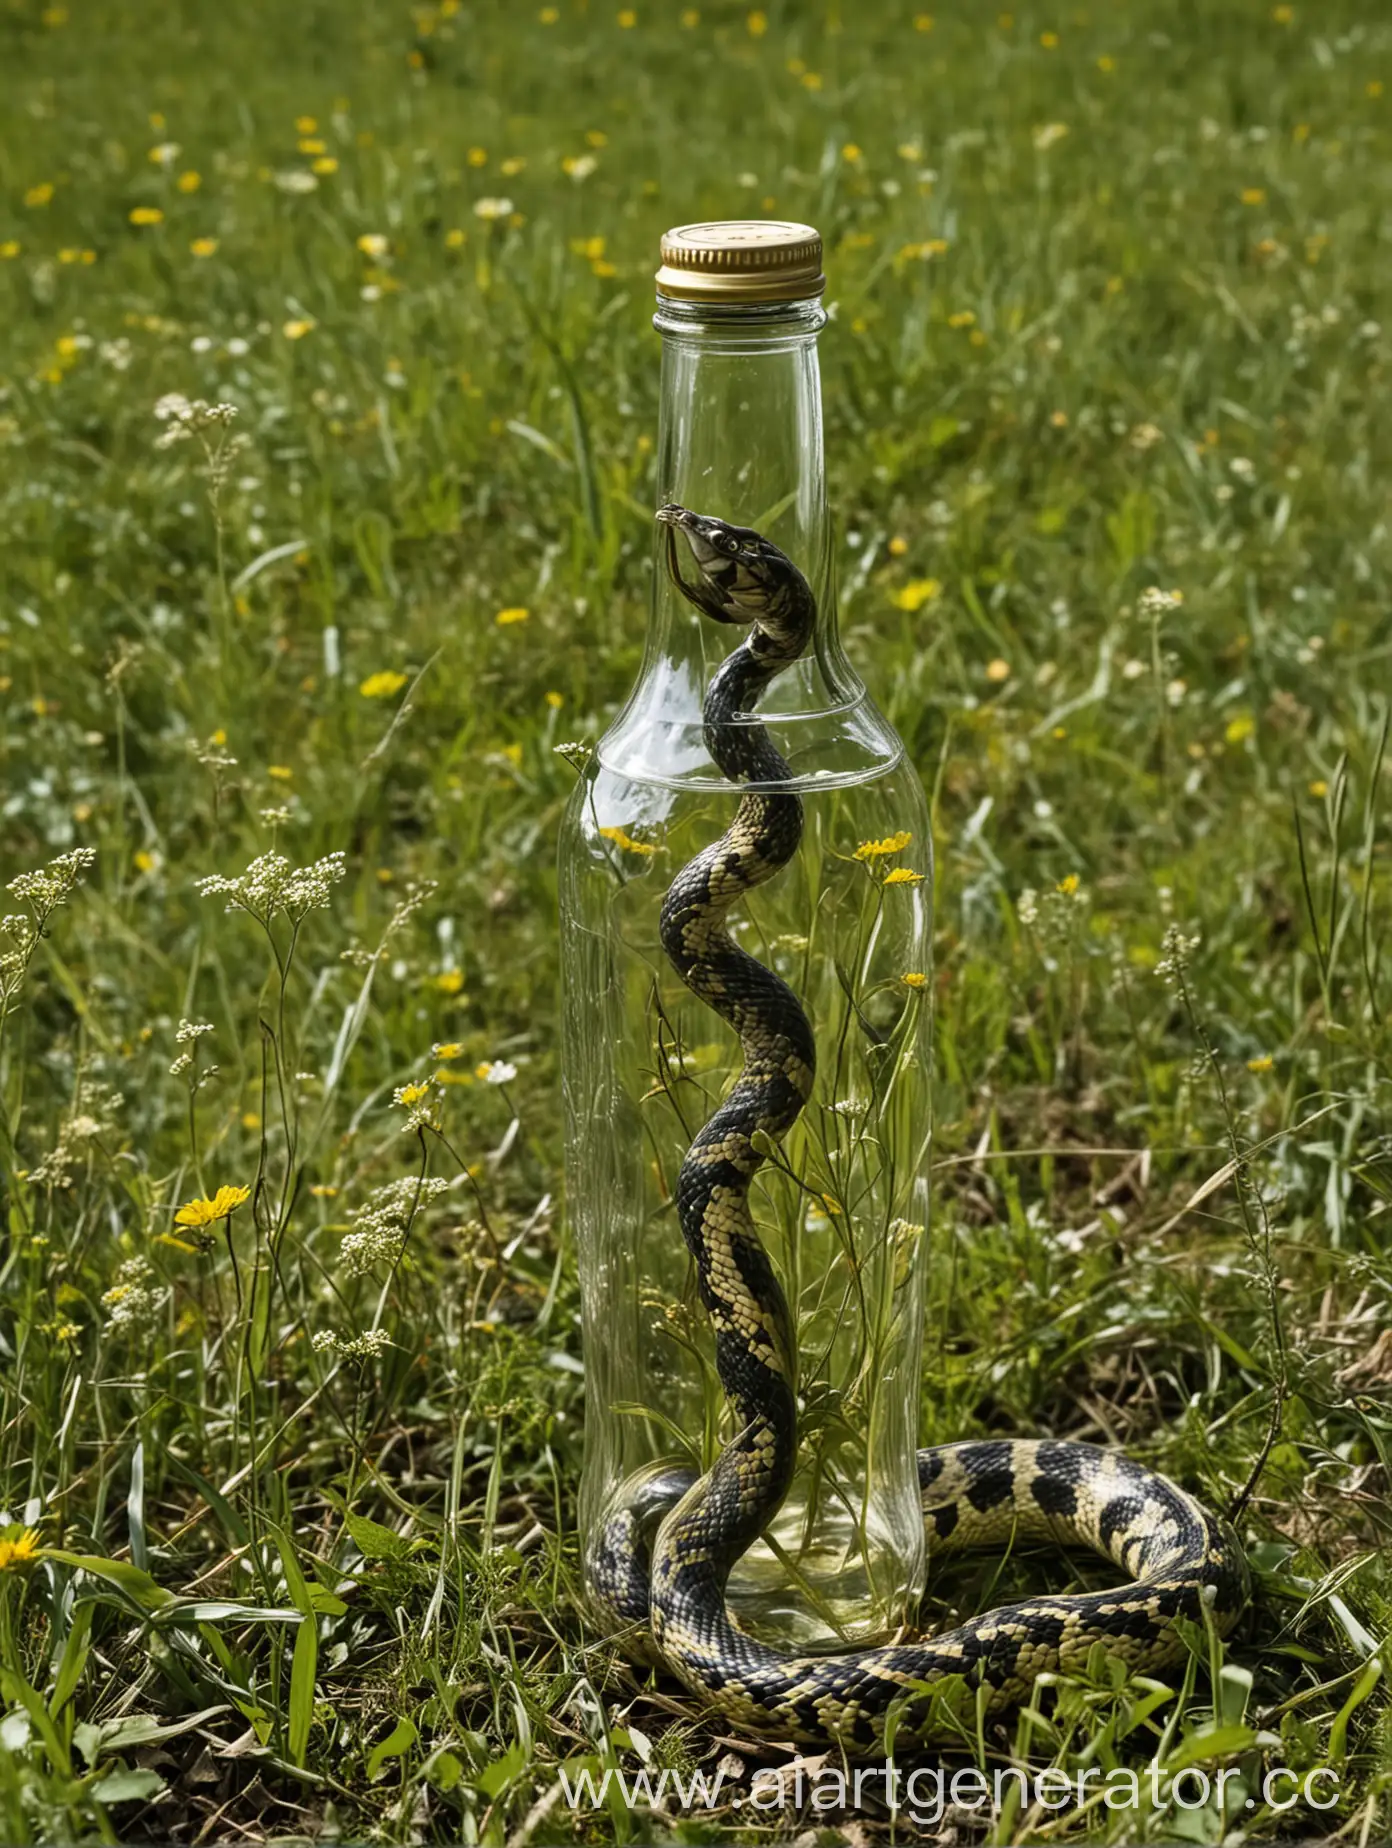 A bottle with a pickled snake stands in the meadow.